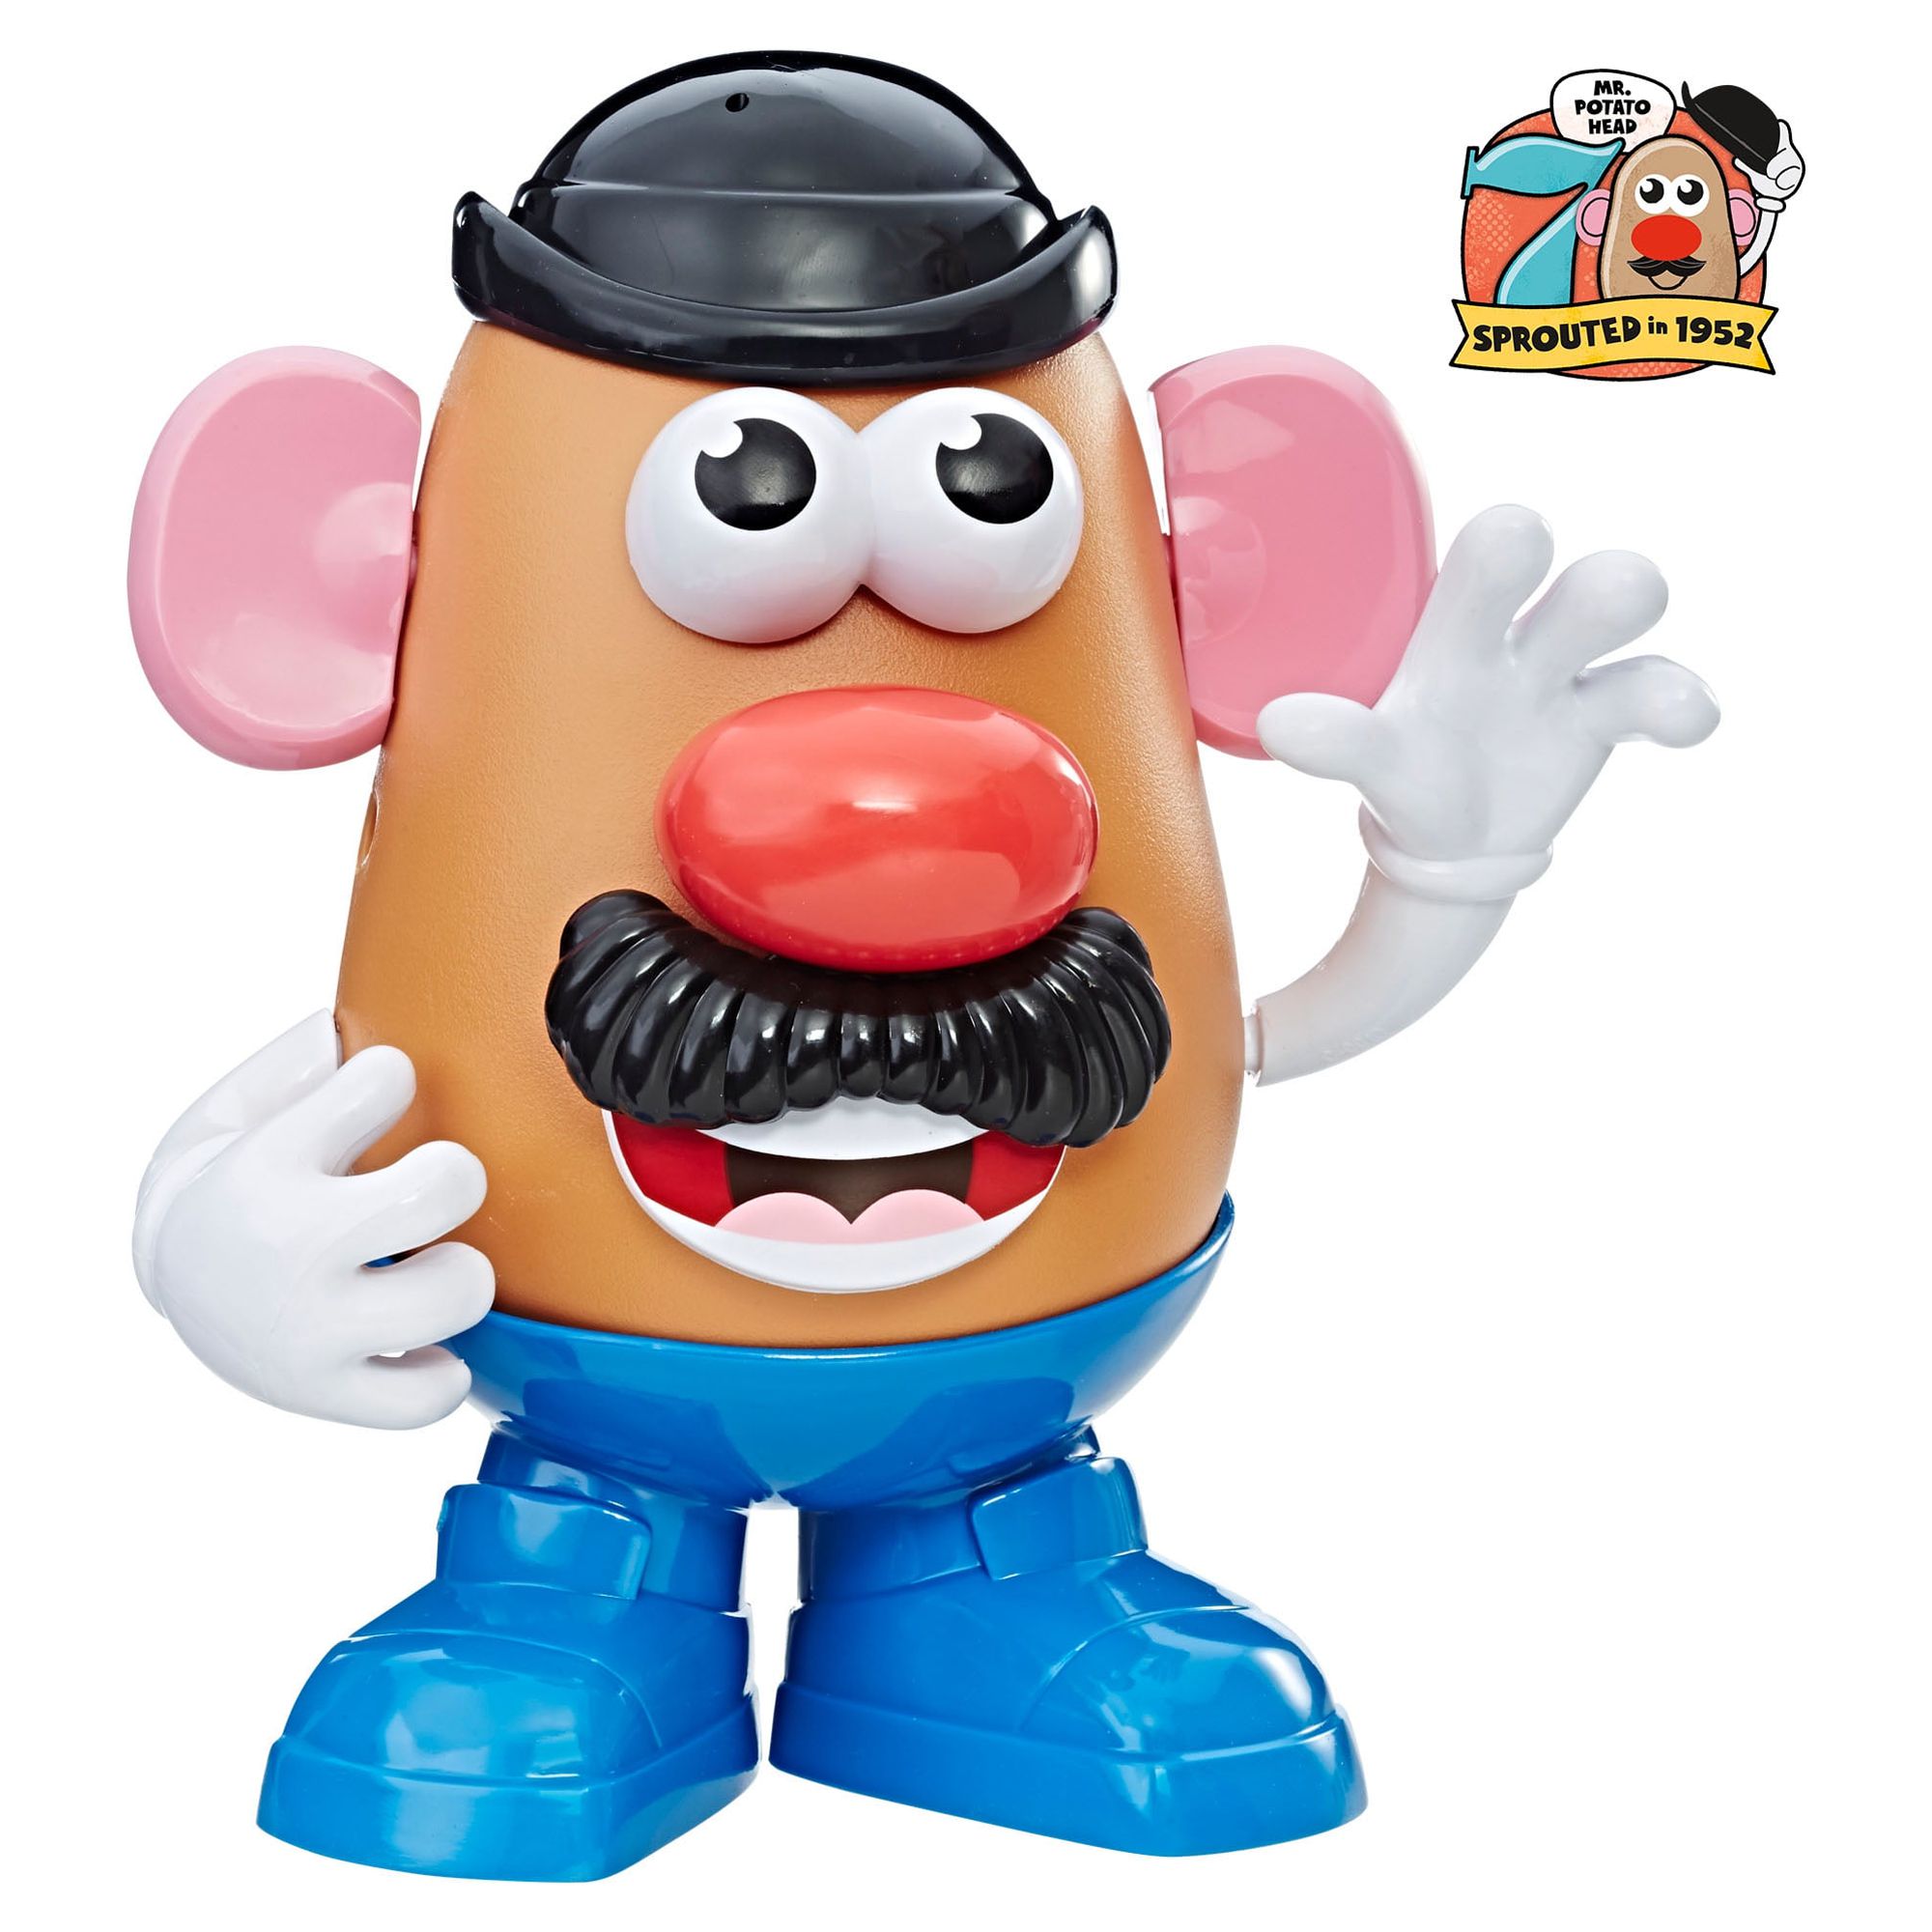 Mr. Potato Head: Playskool Friends Potato Head Kids Toy Action Figure for Boys and Girls Ages 2 3 4 5 6 7 and Up (5.5”) - image 1 of 8